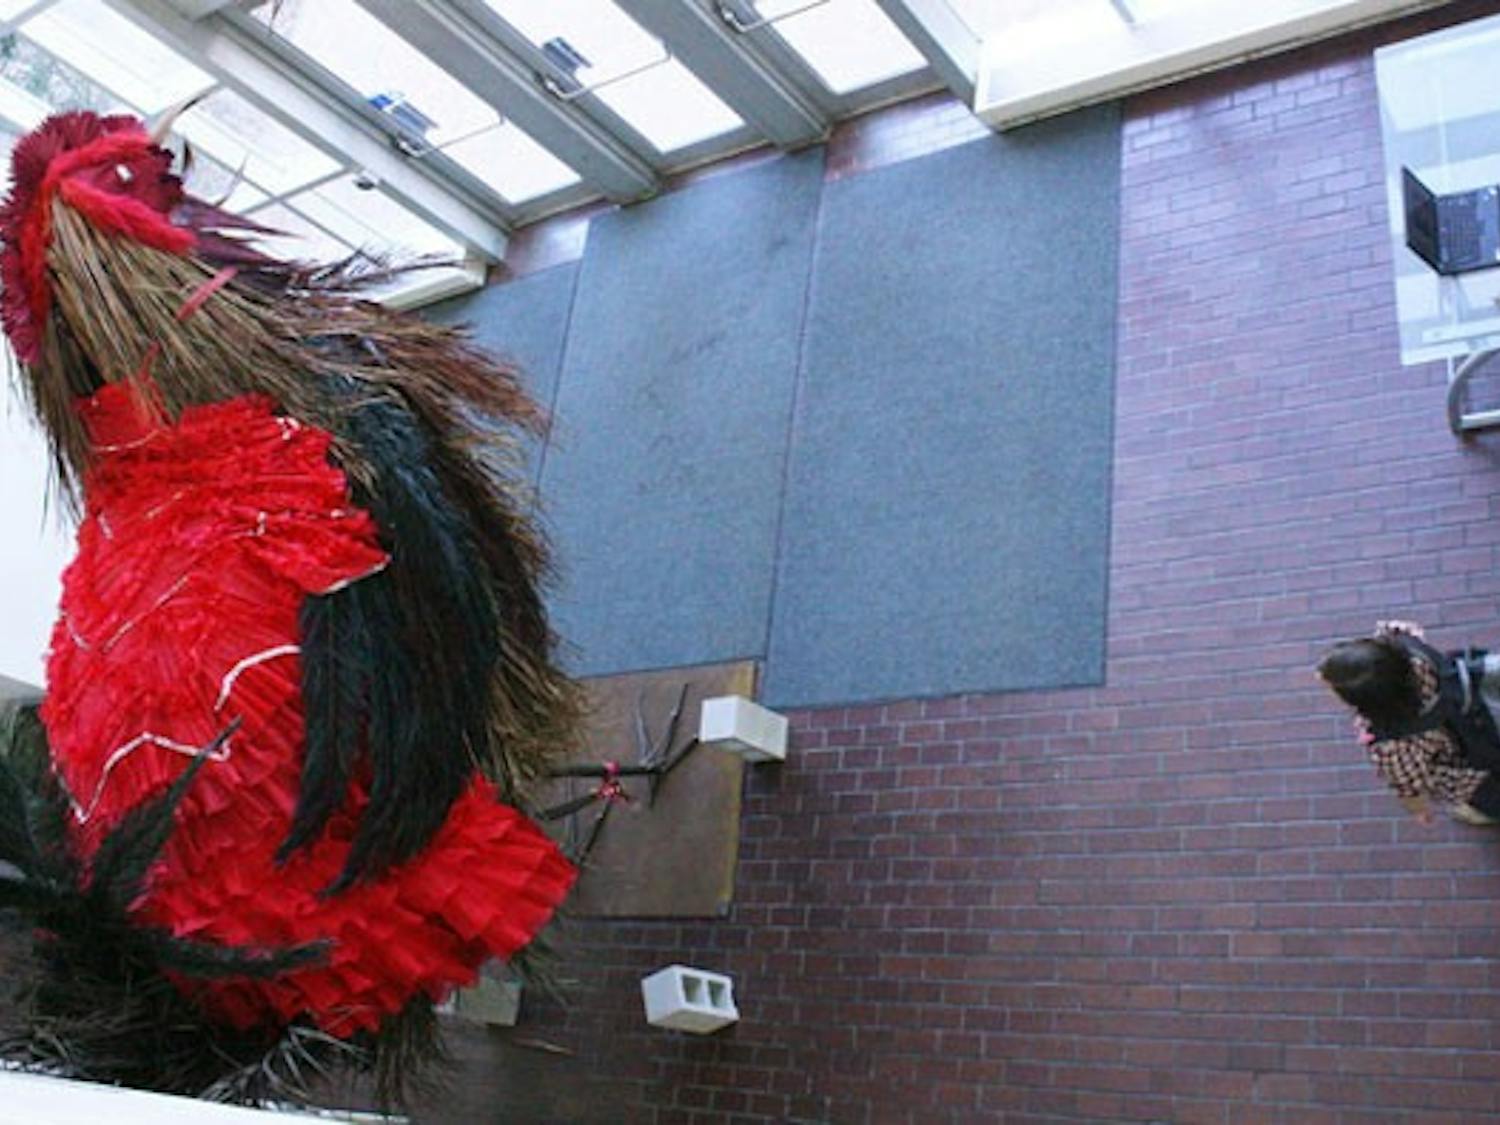 A student observes the giant rooster constructed in the lobby of the Hanes Art Center. DTH/Erin Hull